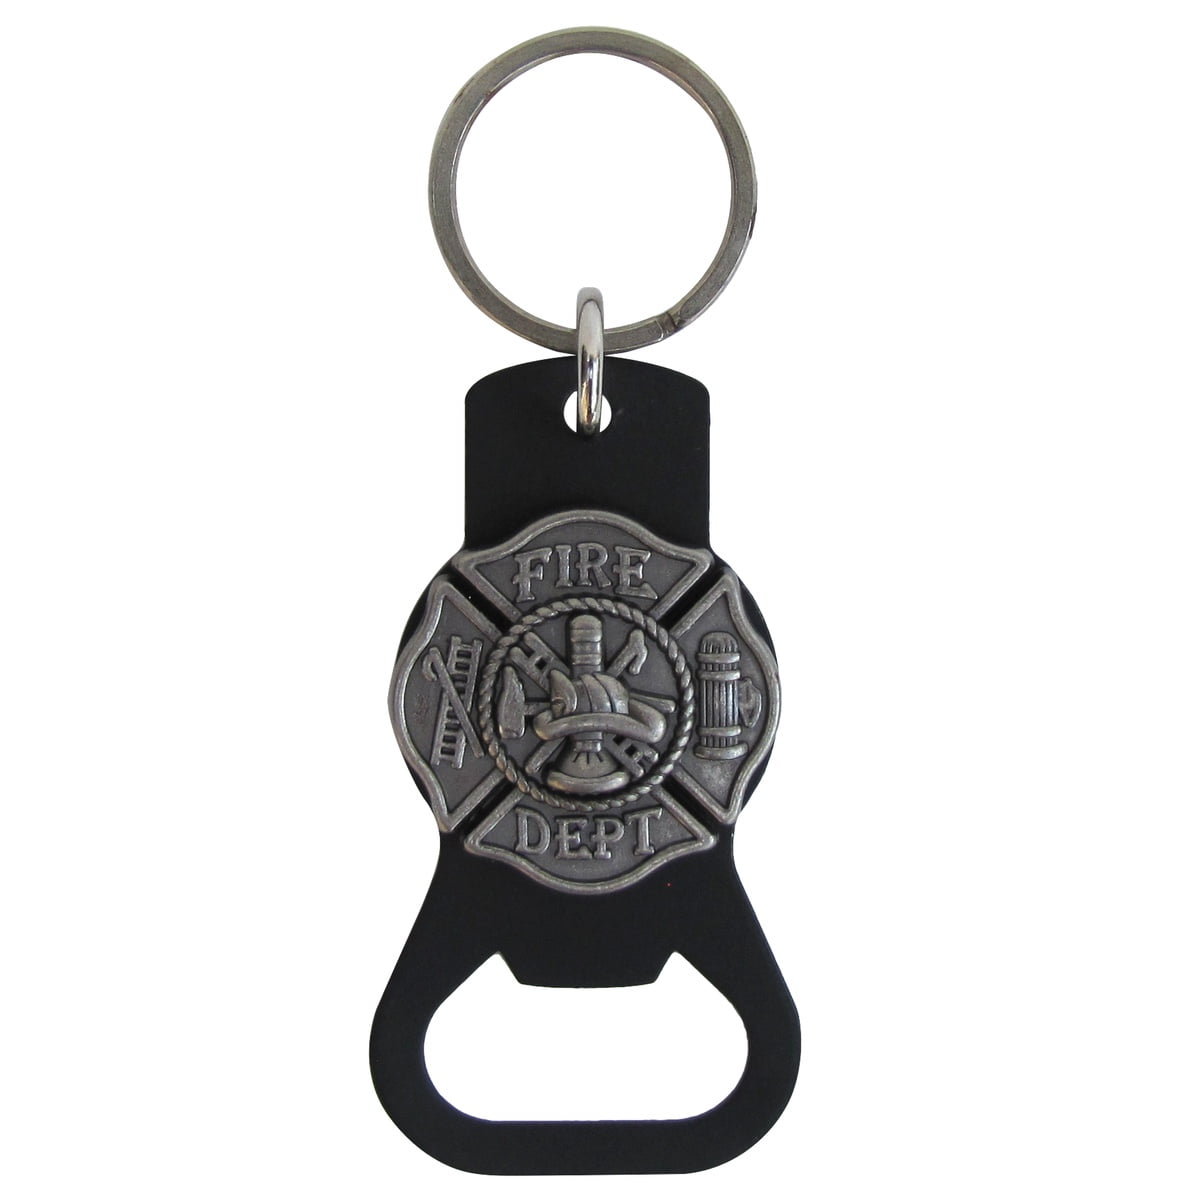 Details about   Creative Bottle Beer Opener Brass Keychain Key Ring Bar Tool